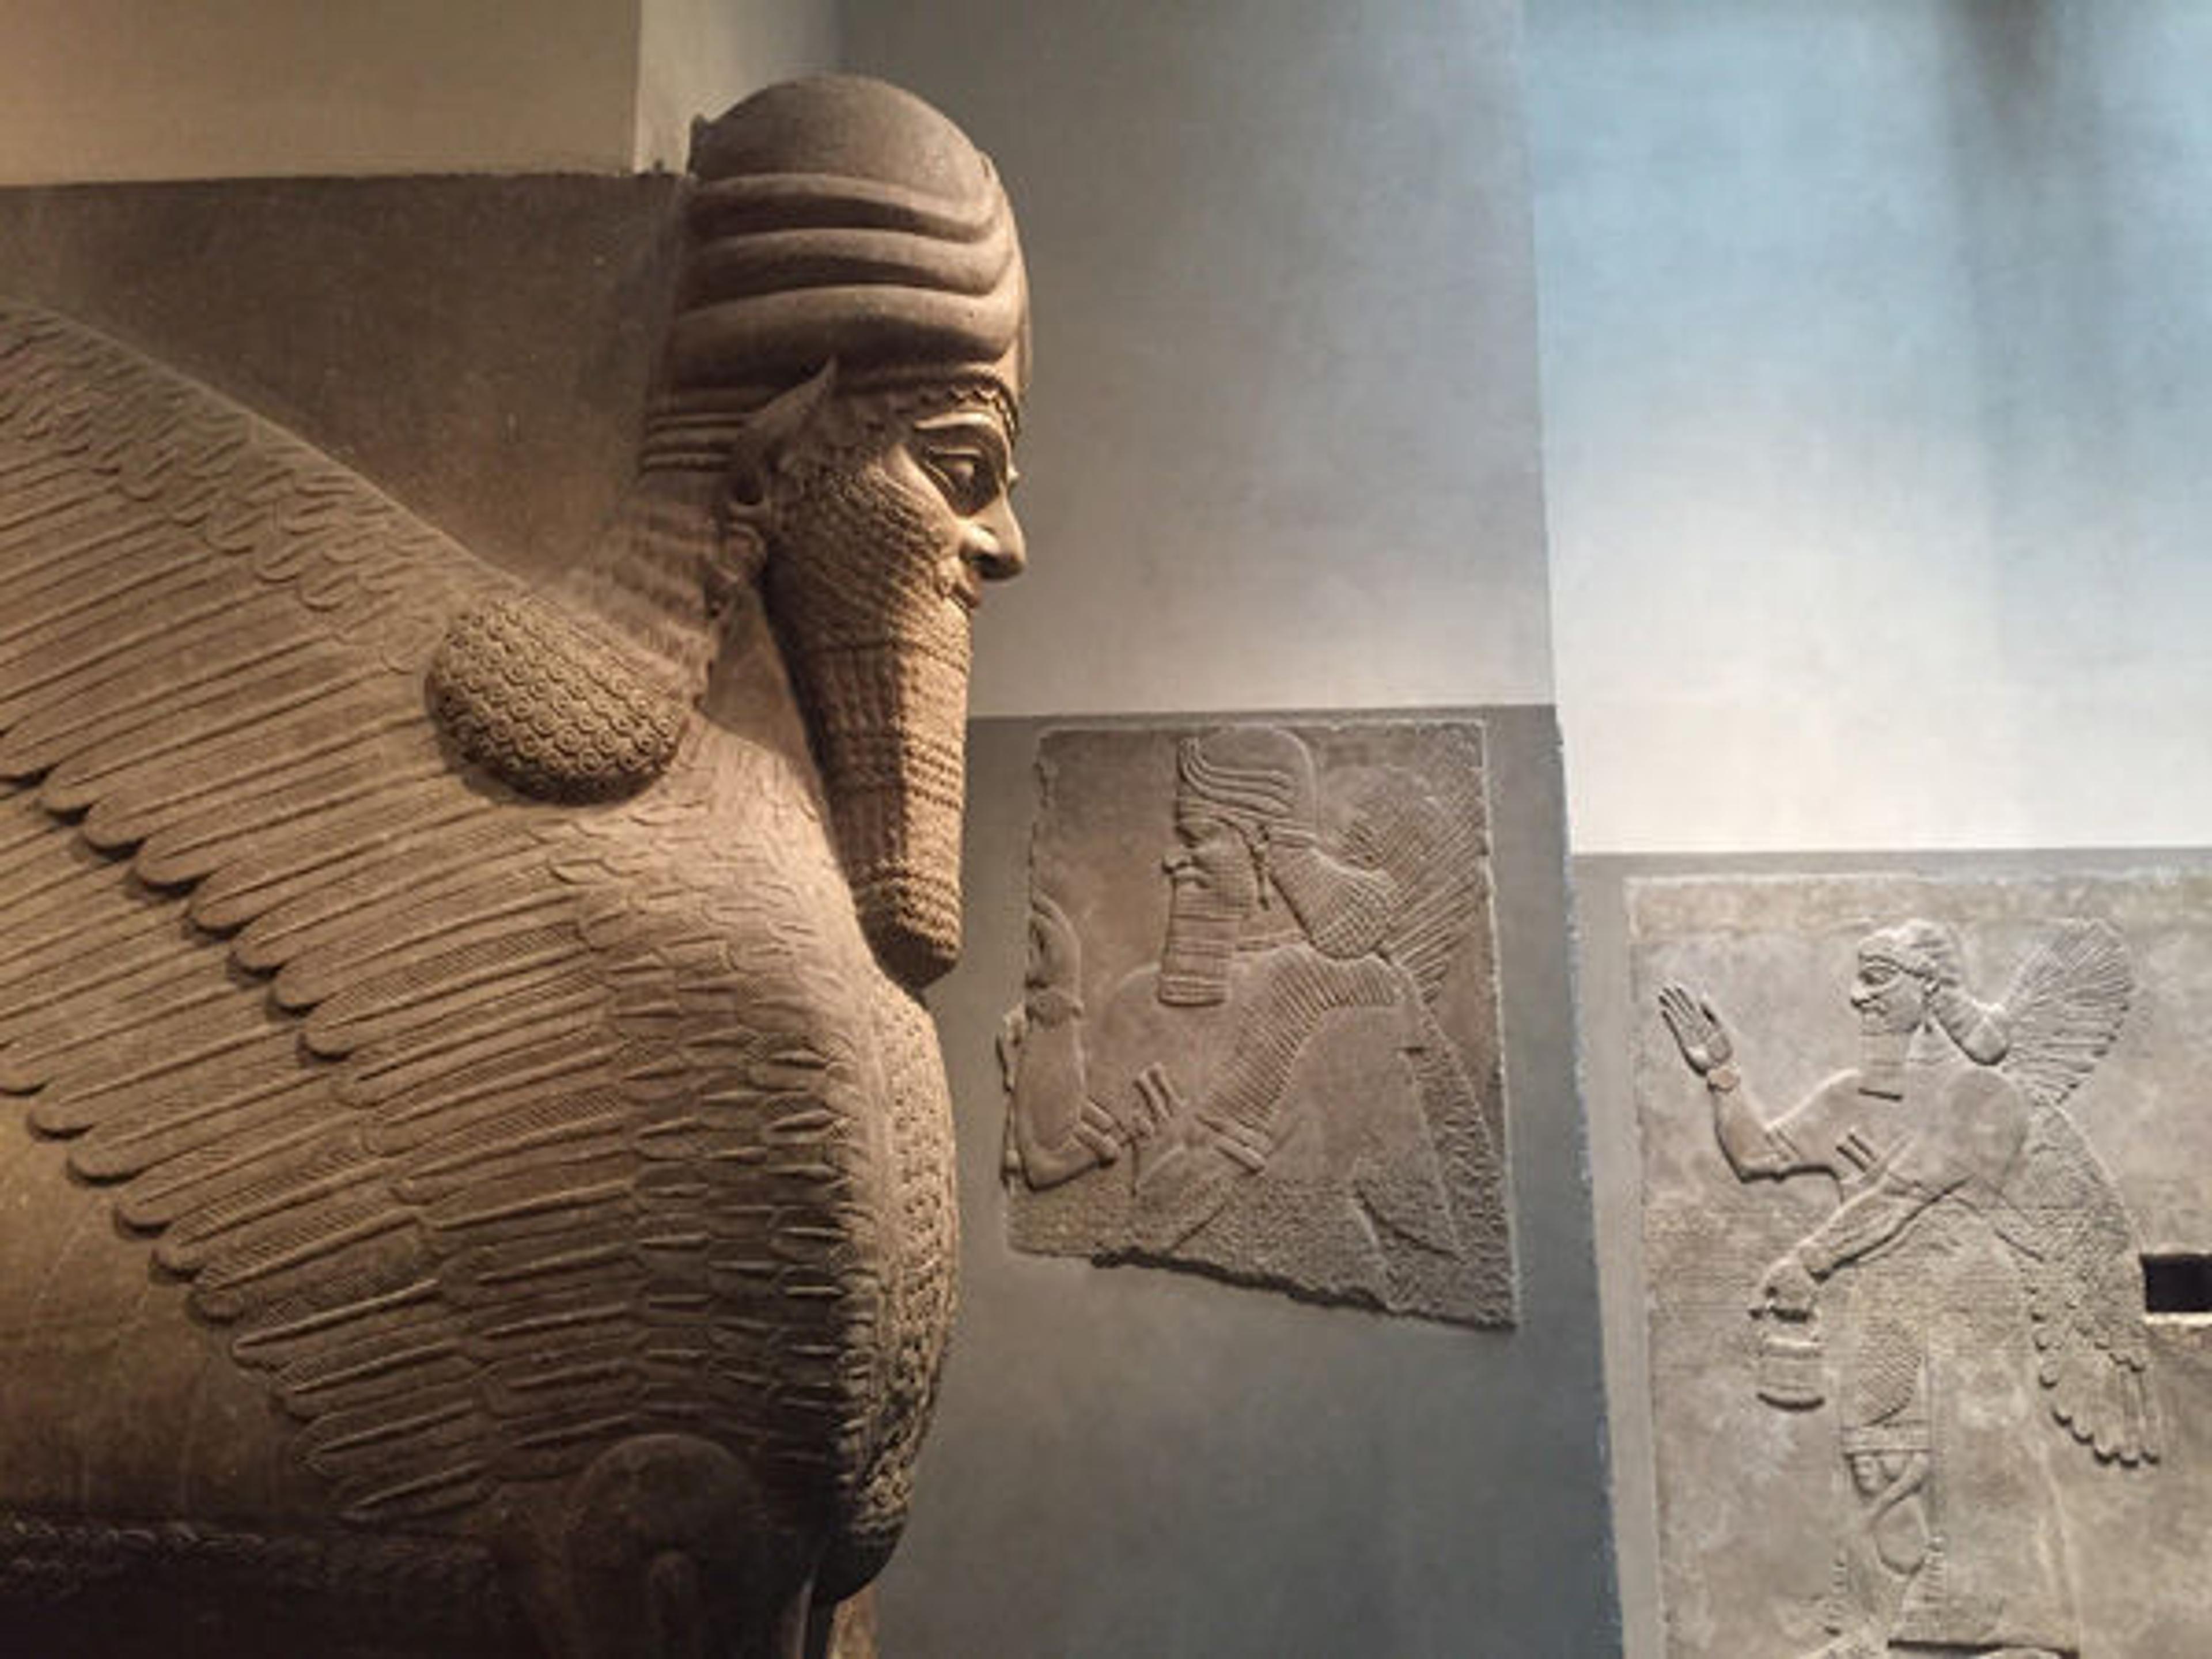 Gallery 401: The Assyrian Royal Court